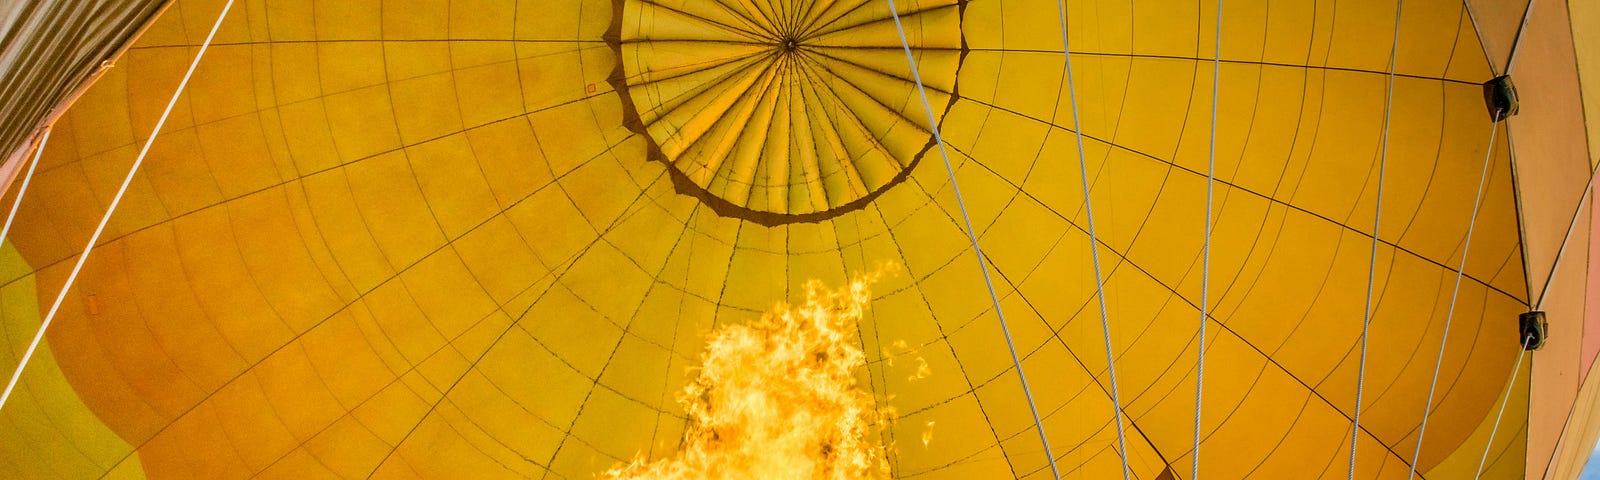 Yellow and red flames firing up a bright yellow hot air balloon.